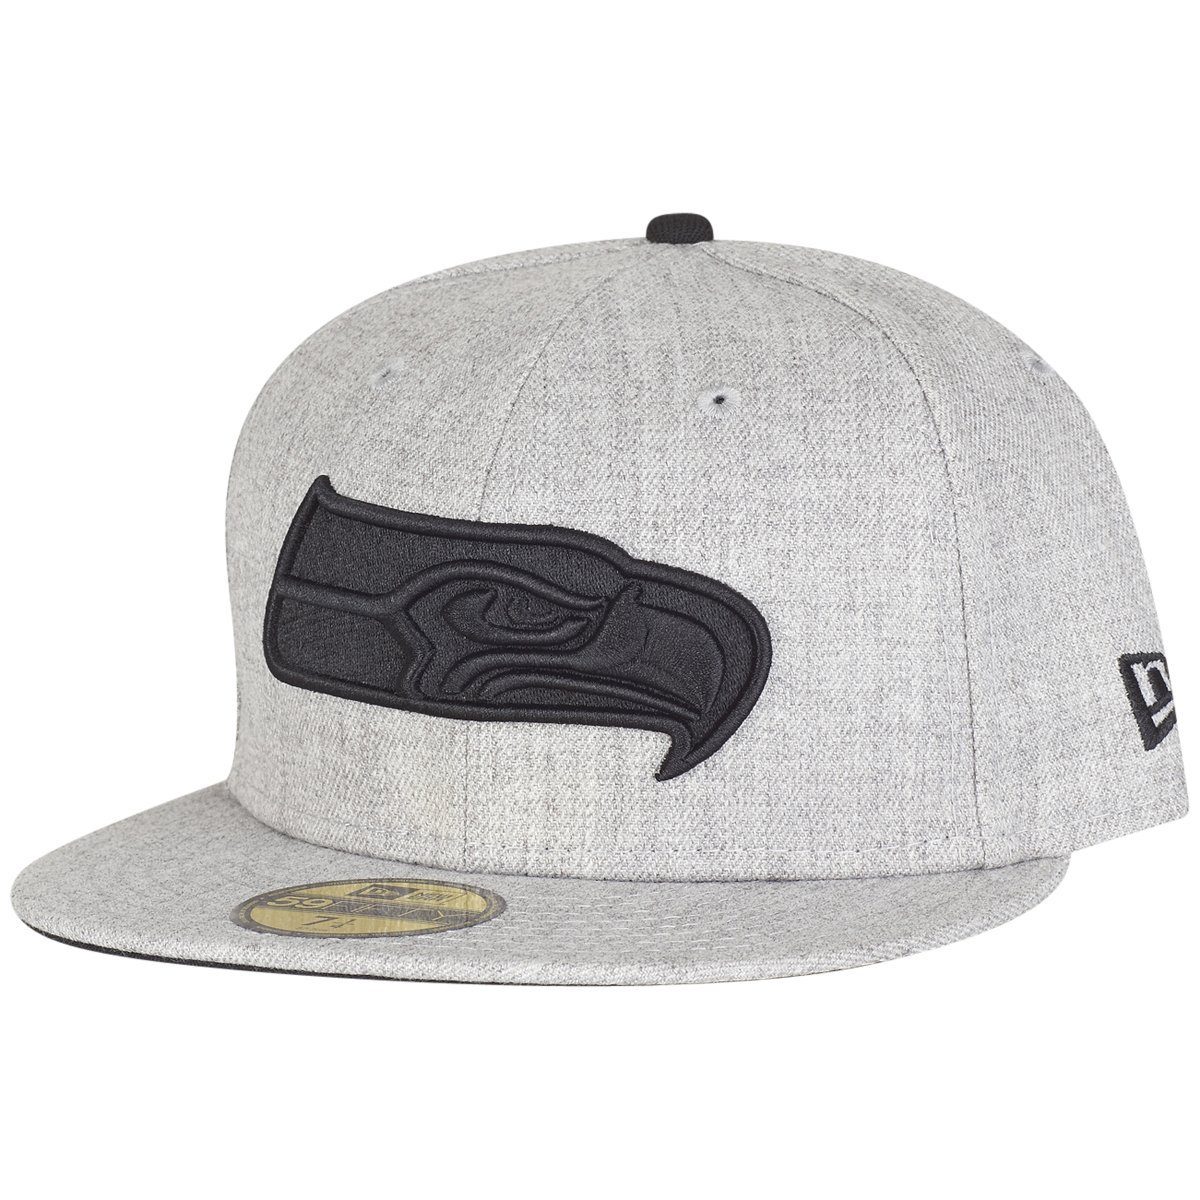 New Seattle Fitted Era 59Fifty HEATHER Seahawks Cap